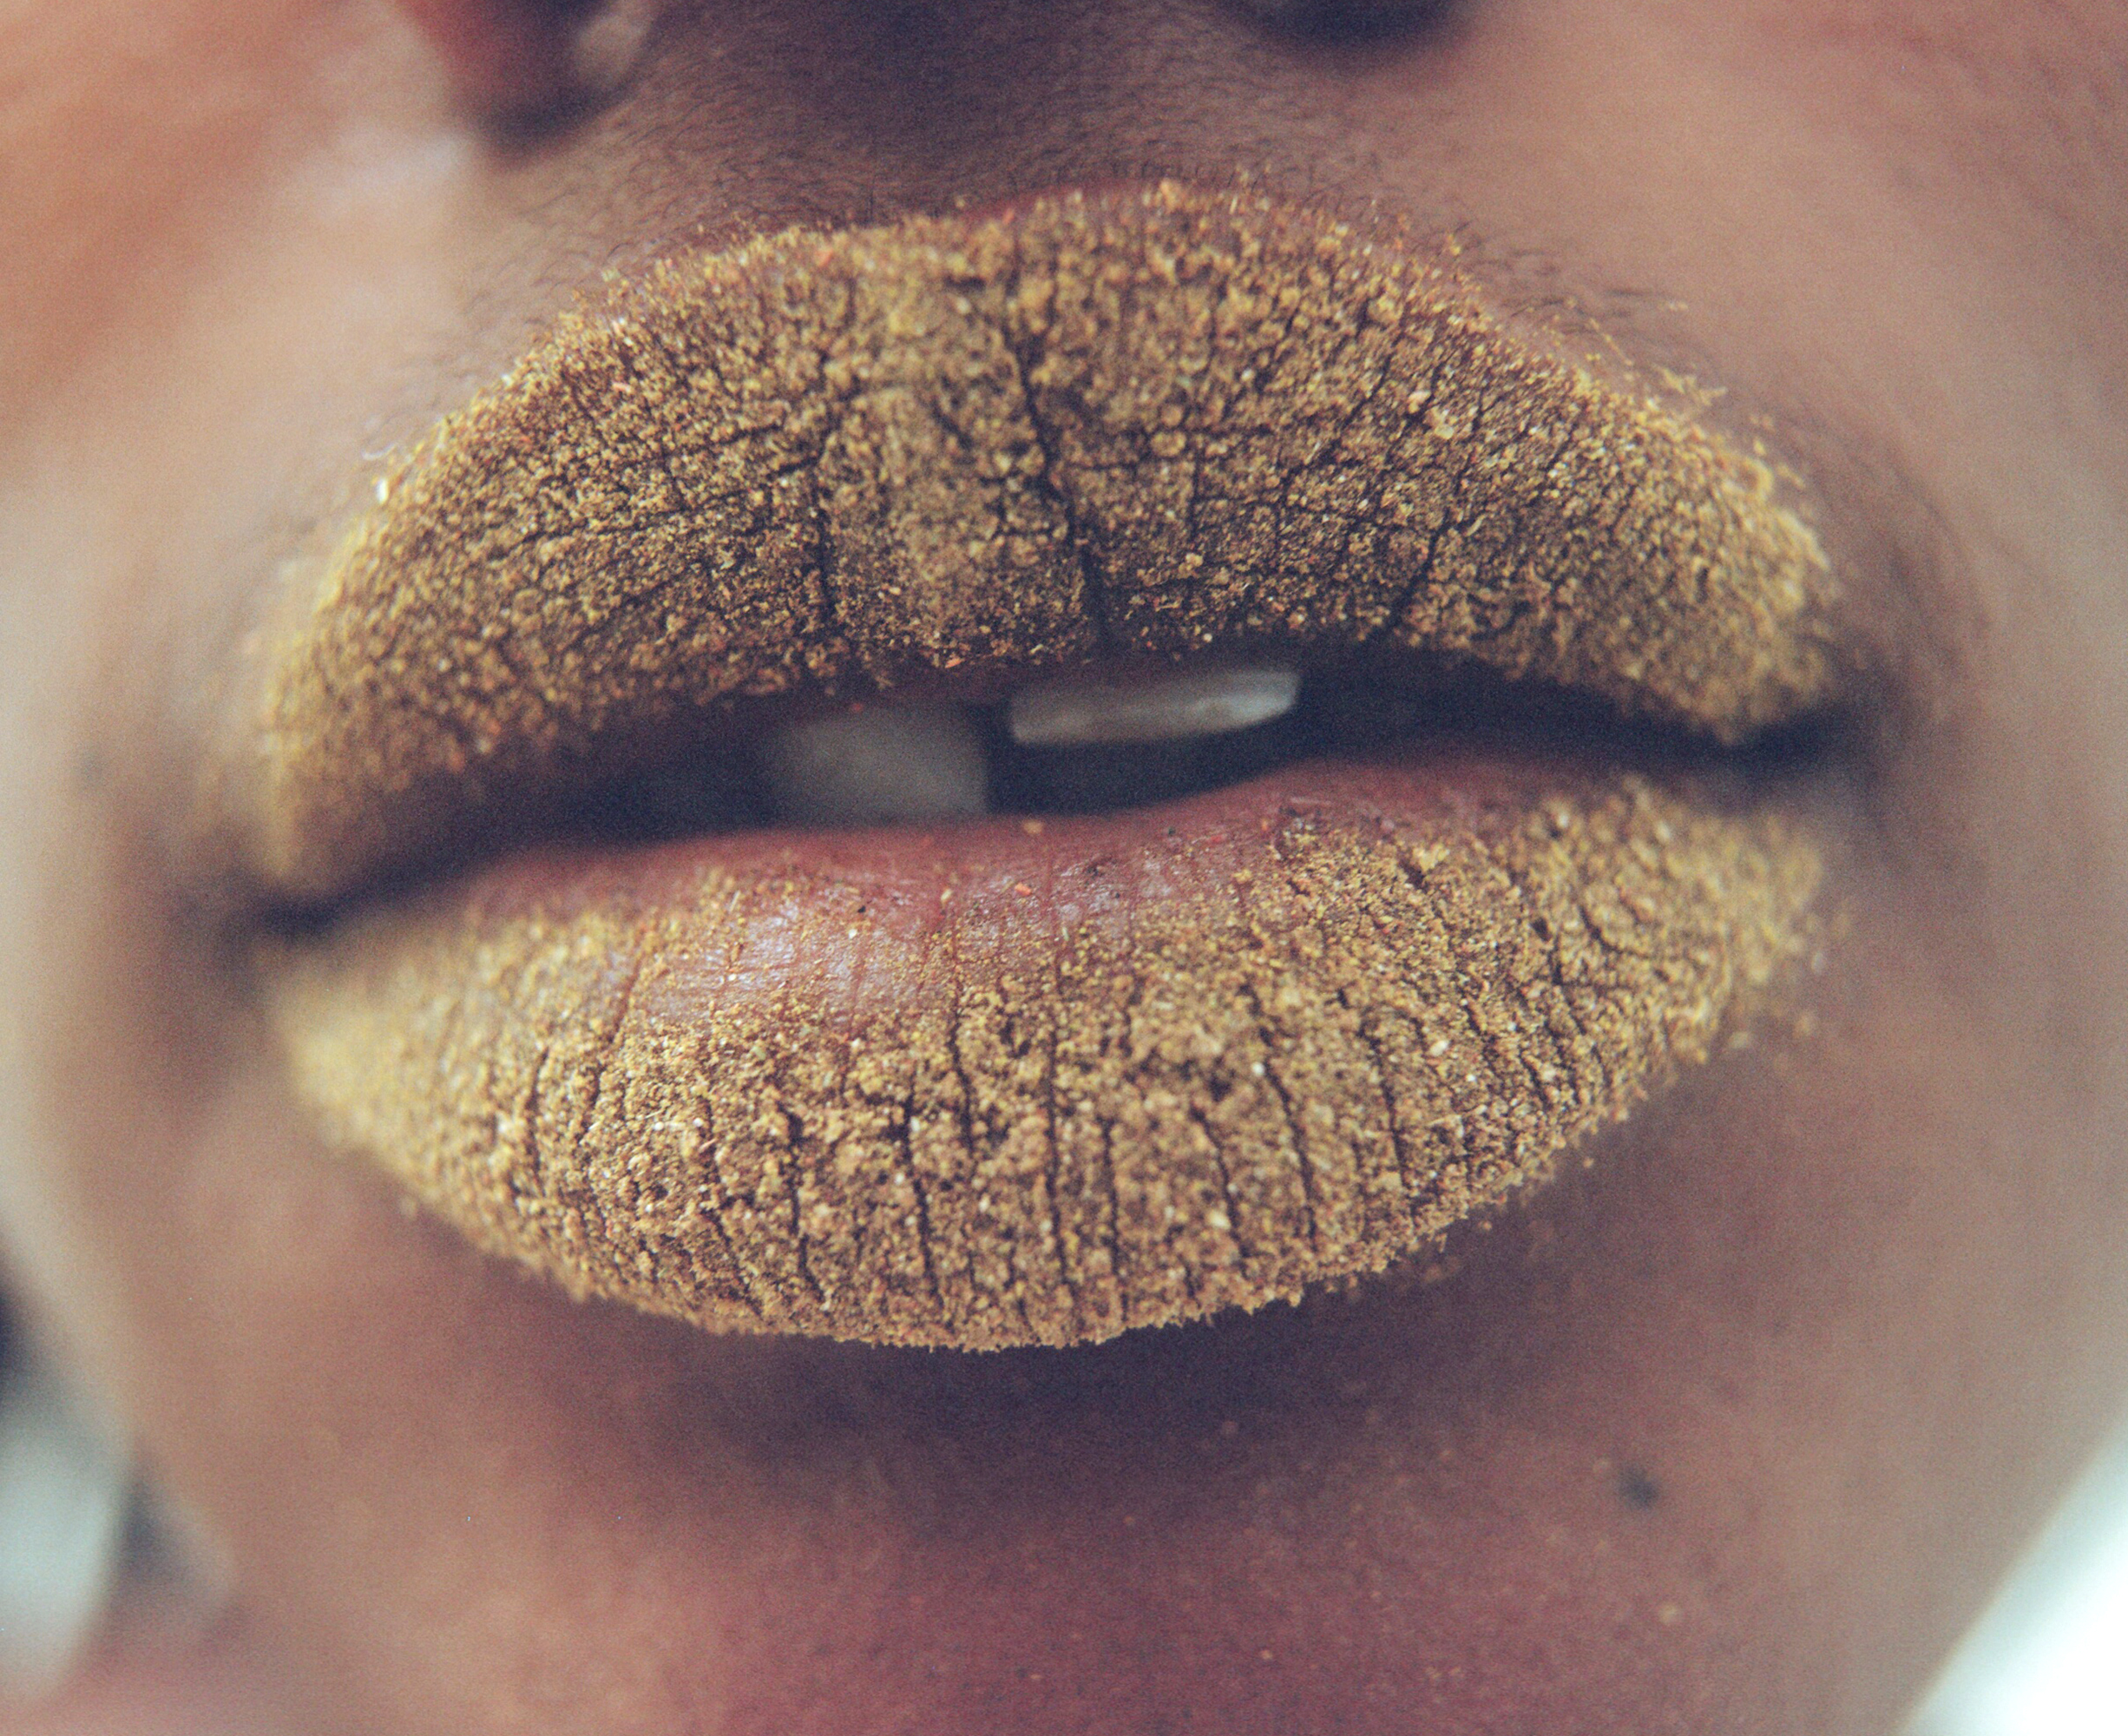 NeoNutritions campaign image; lips covered in sand